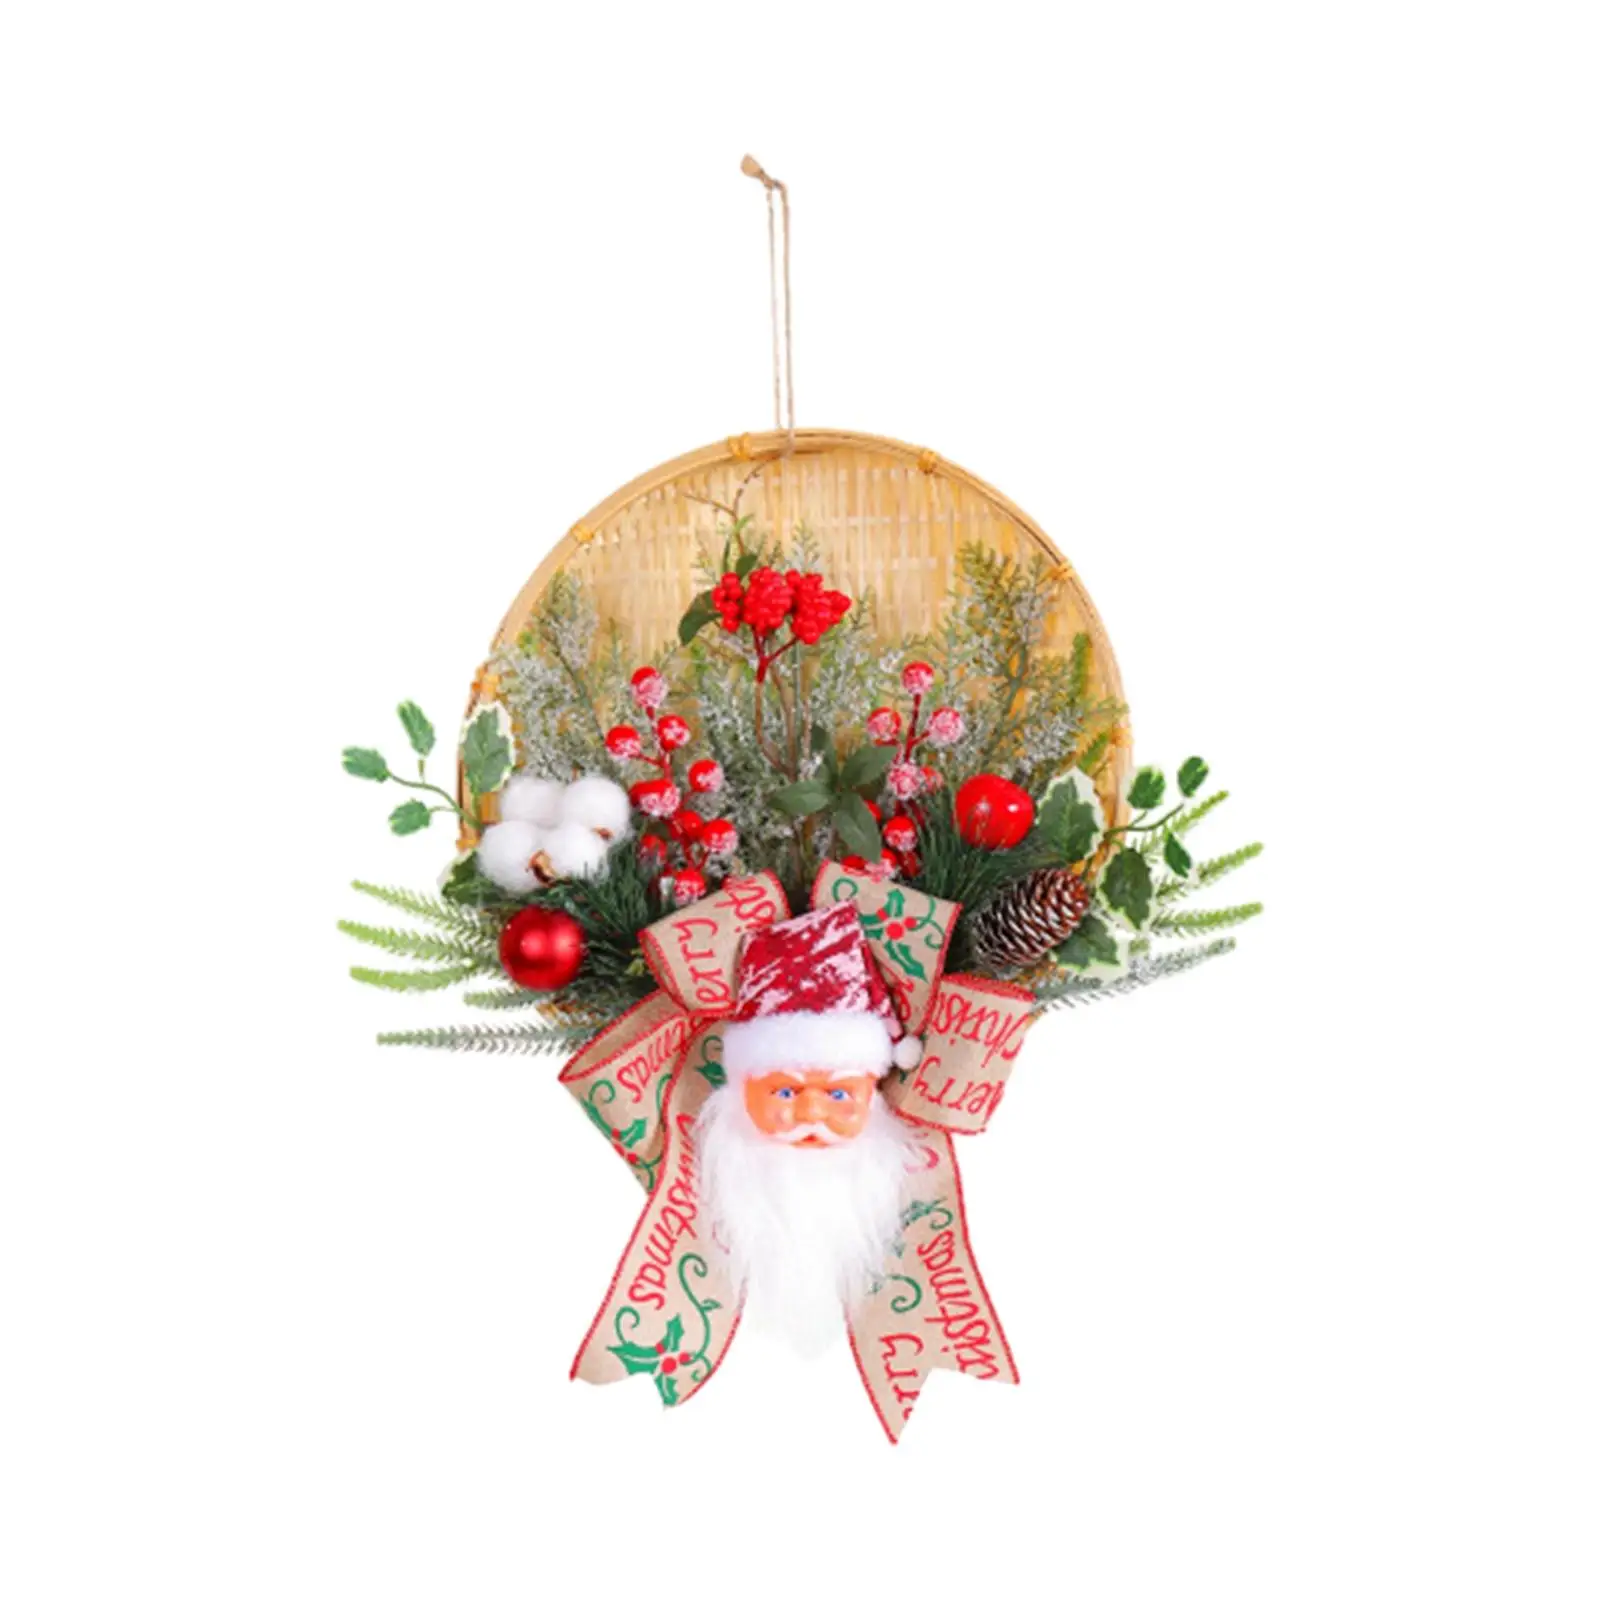 Hanging Door Garland Christmas Garland Christmas Wreath Christmas Decoration for Home Porch Window Living Room Decoration